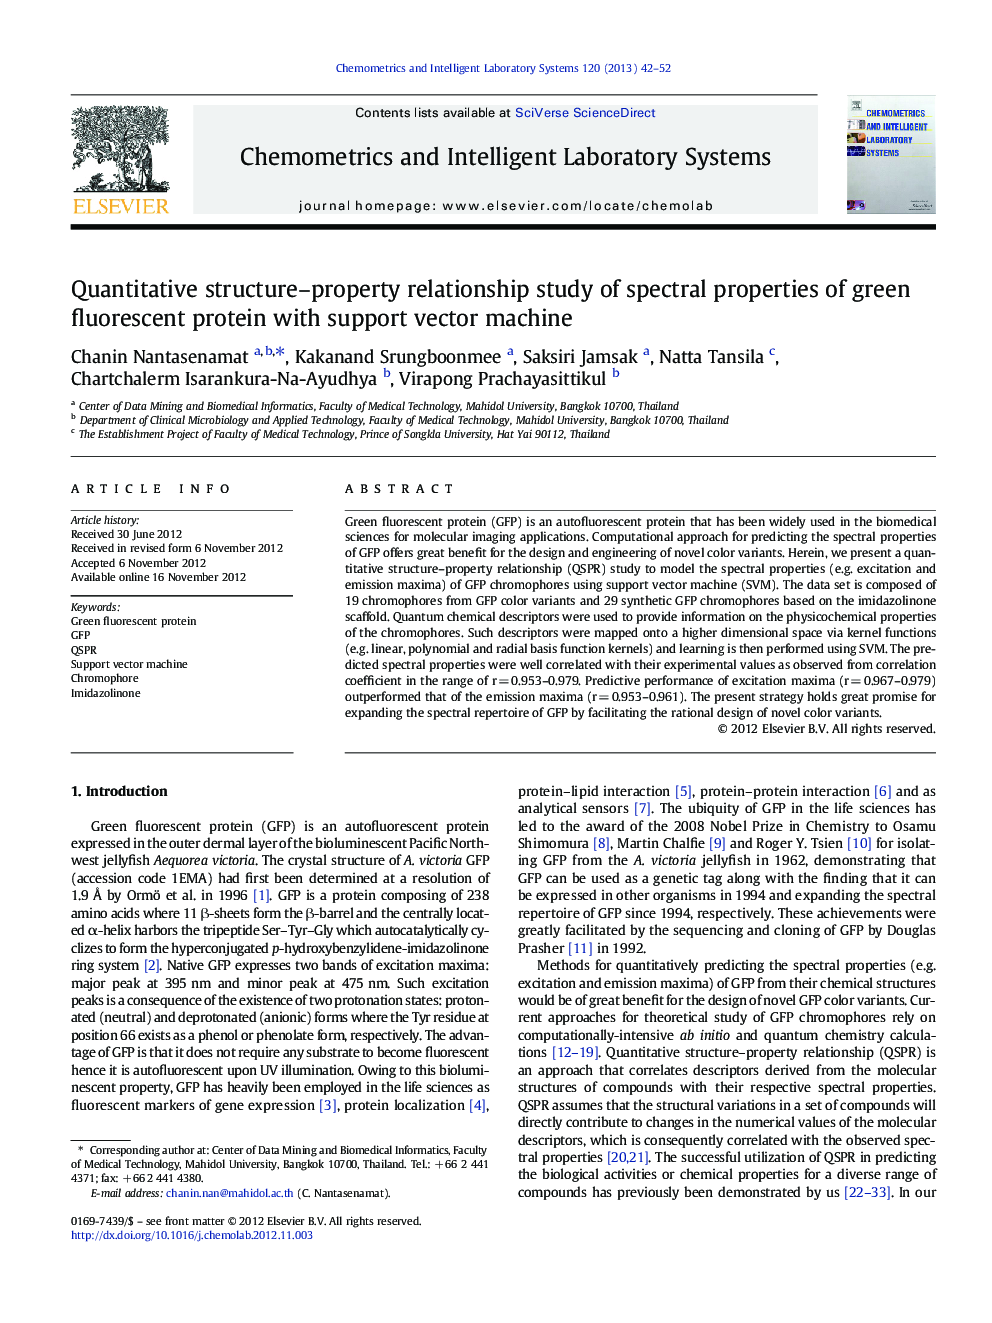 Quantitative structure-property relationship study of spectral properties of green fluorescent protein with support vector machine